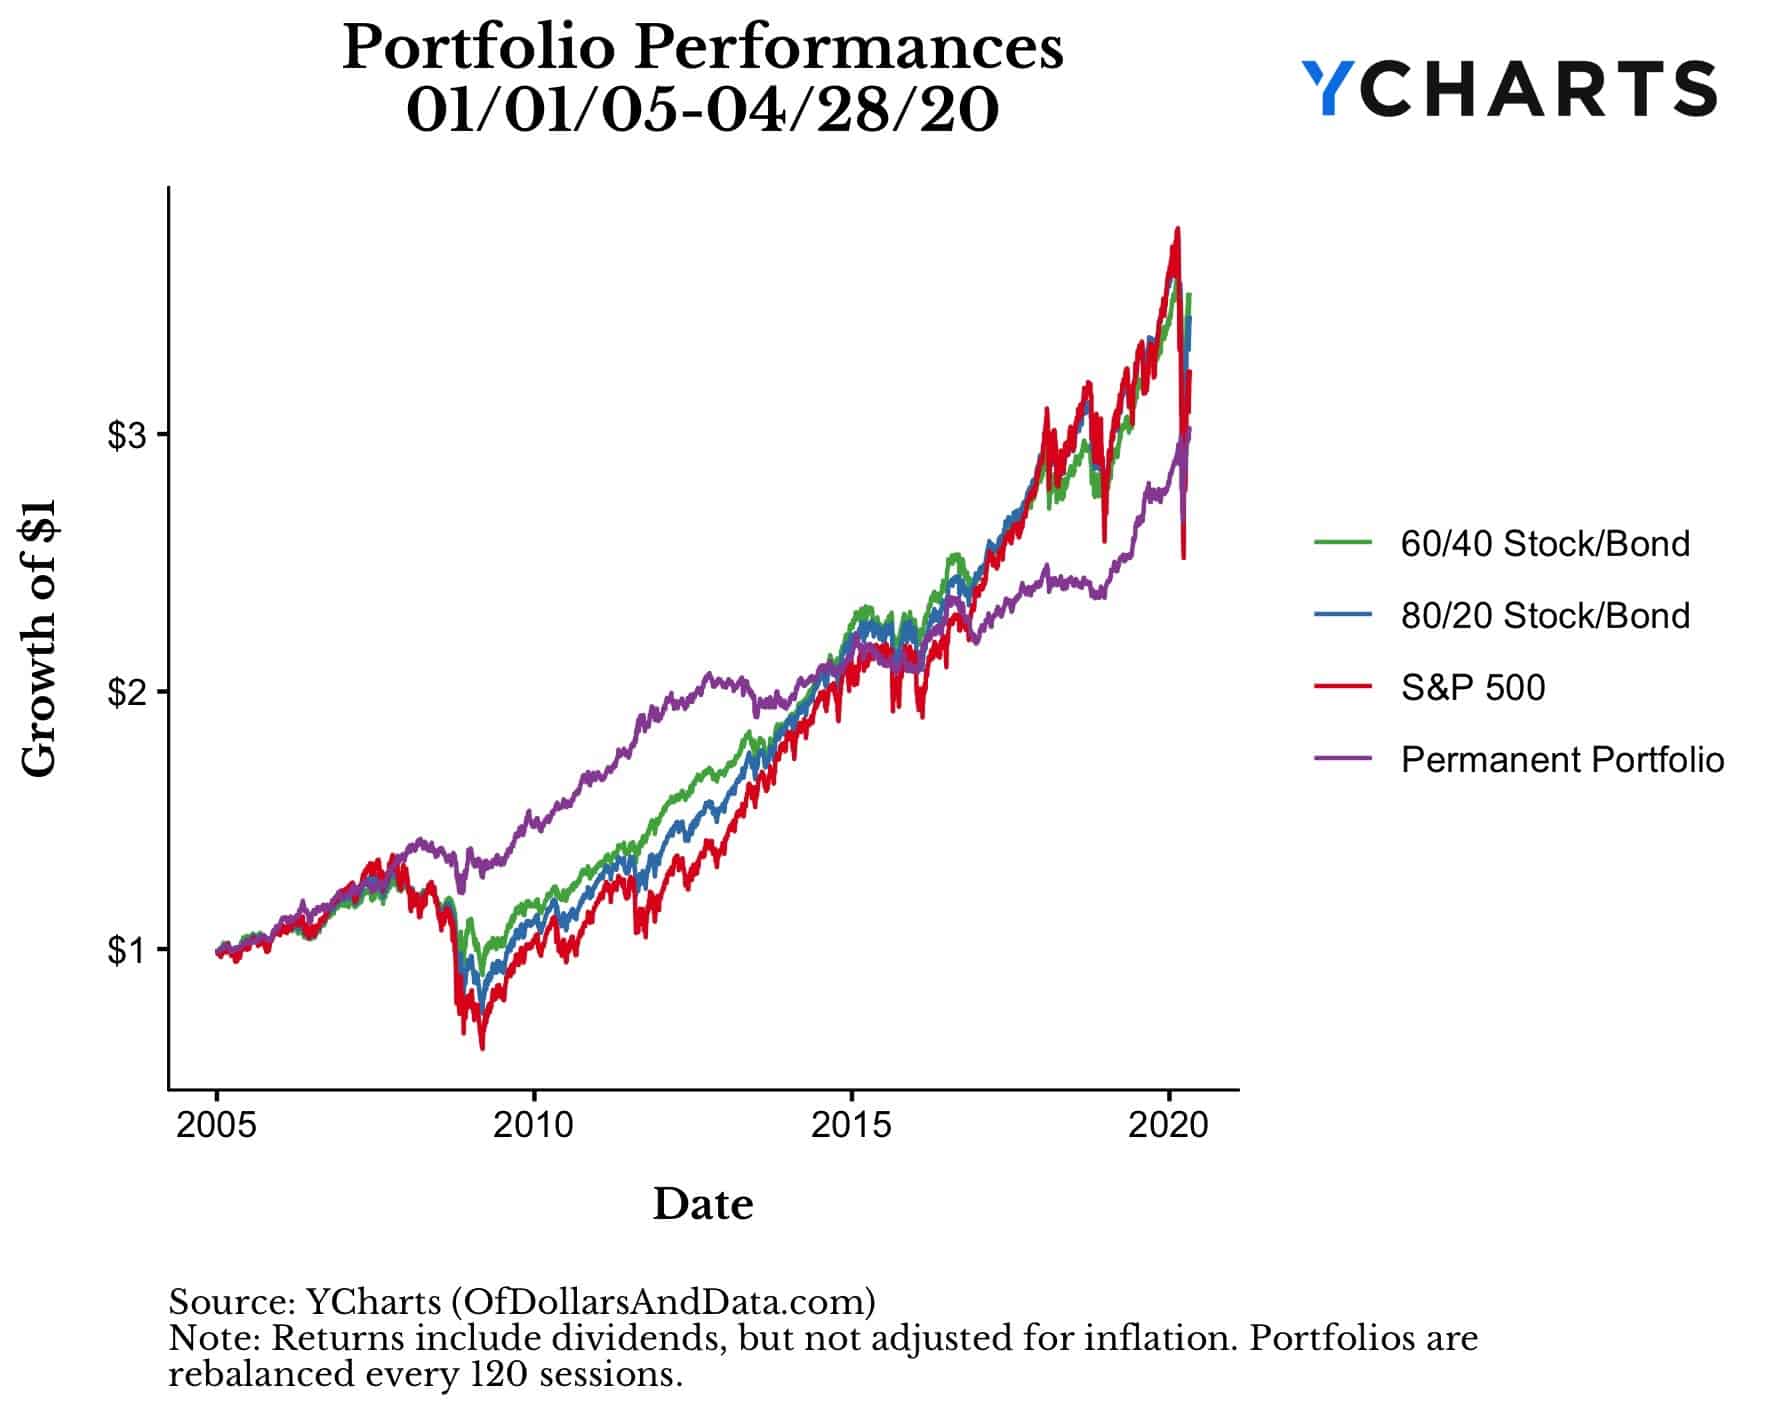 Performance for the Permanent Portfolio, 60/40, 80/20, and the S&P 500 from 2005 to 2020